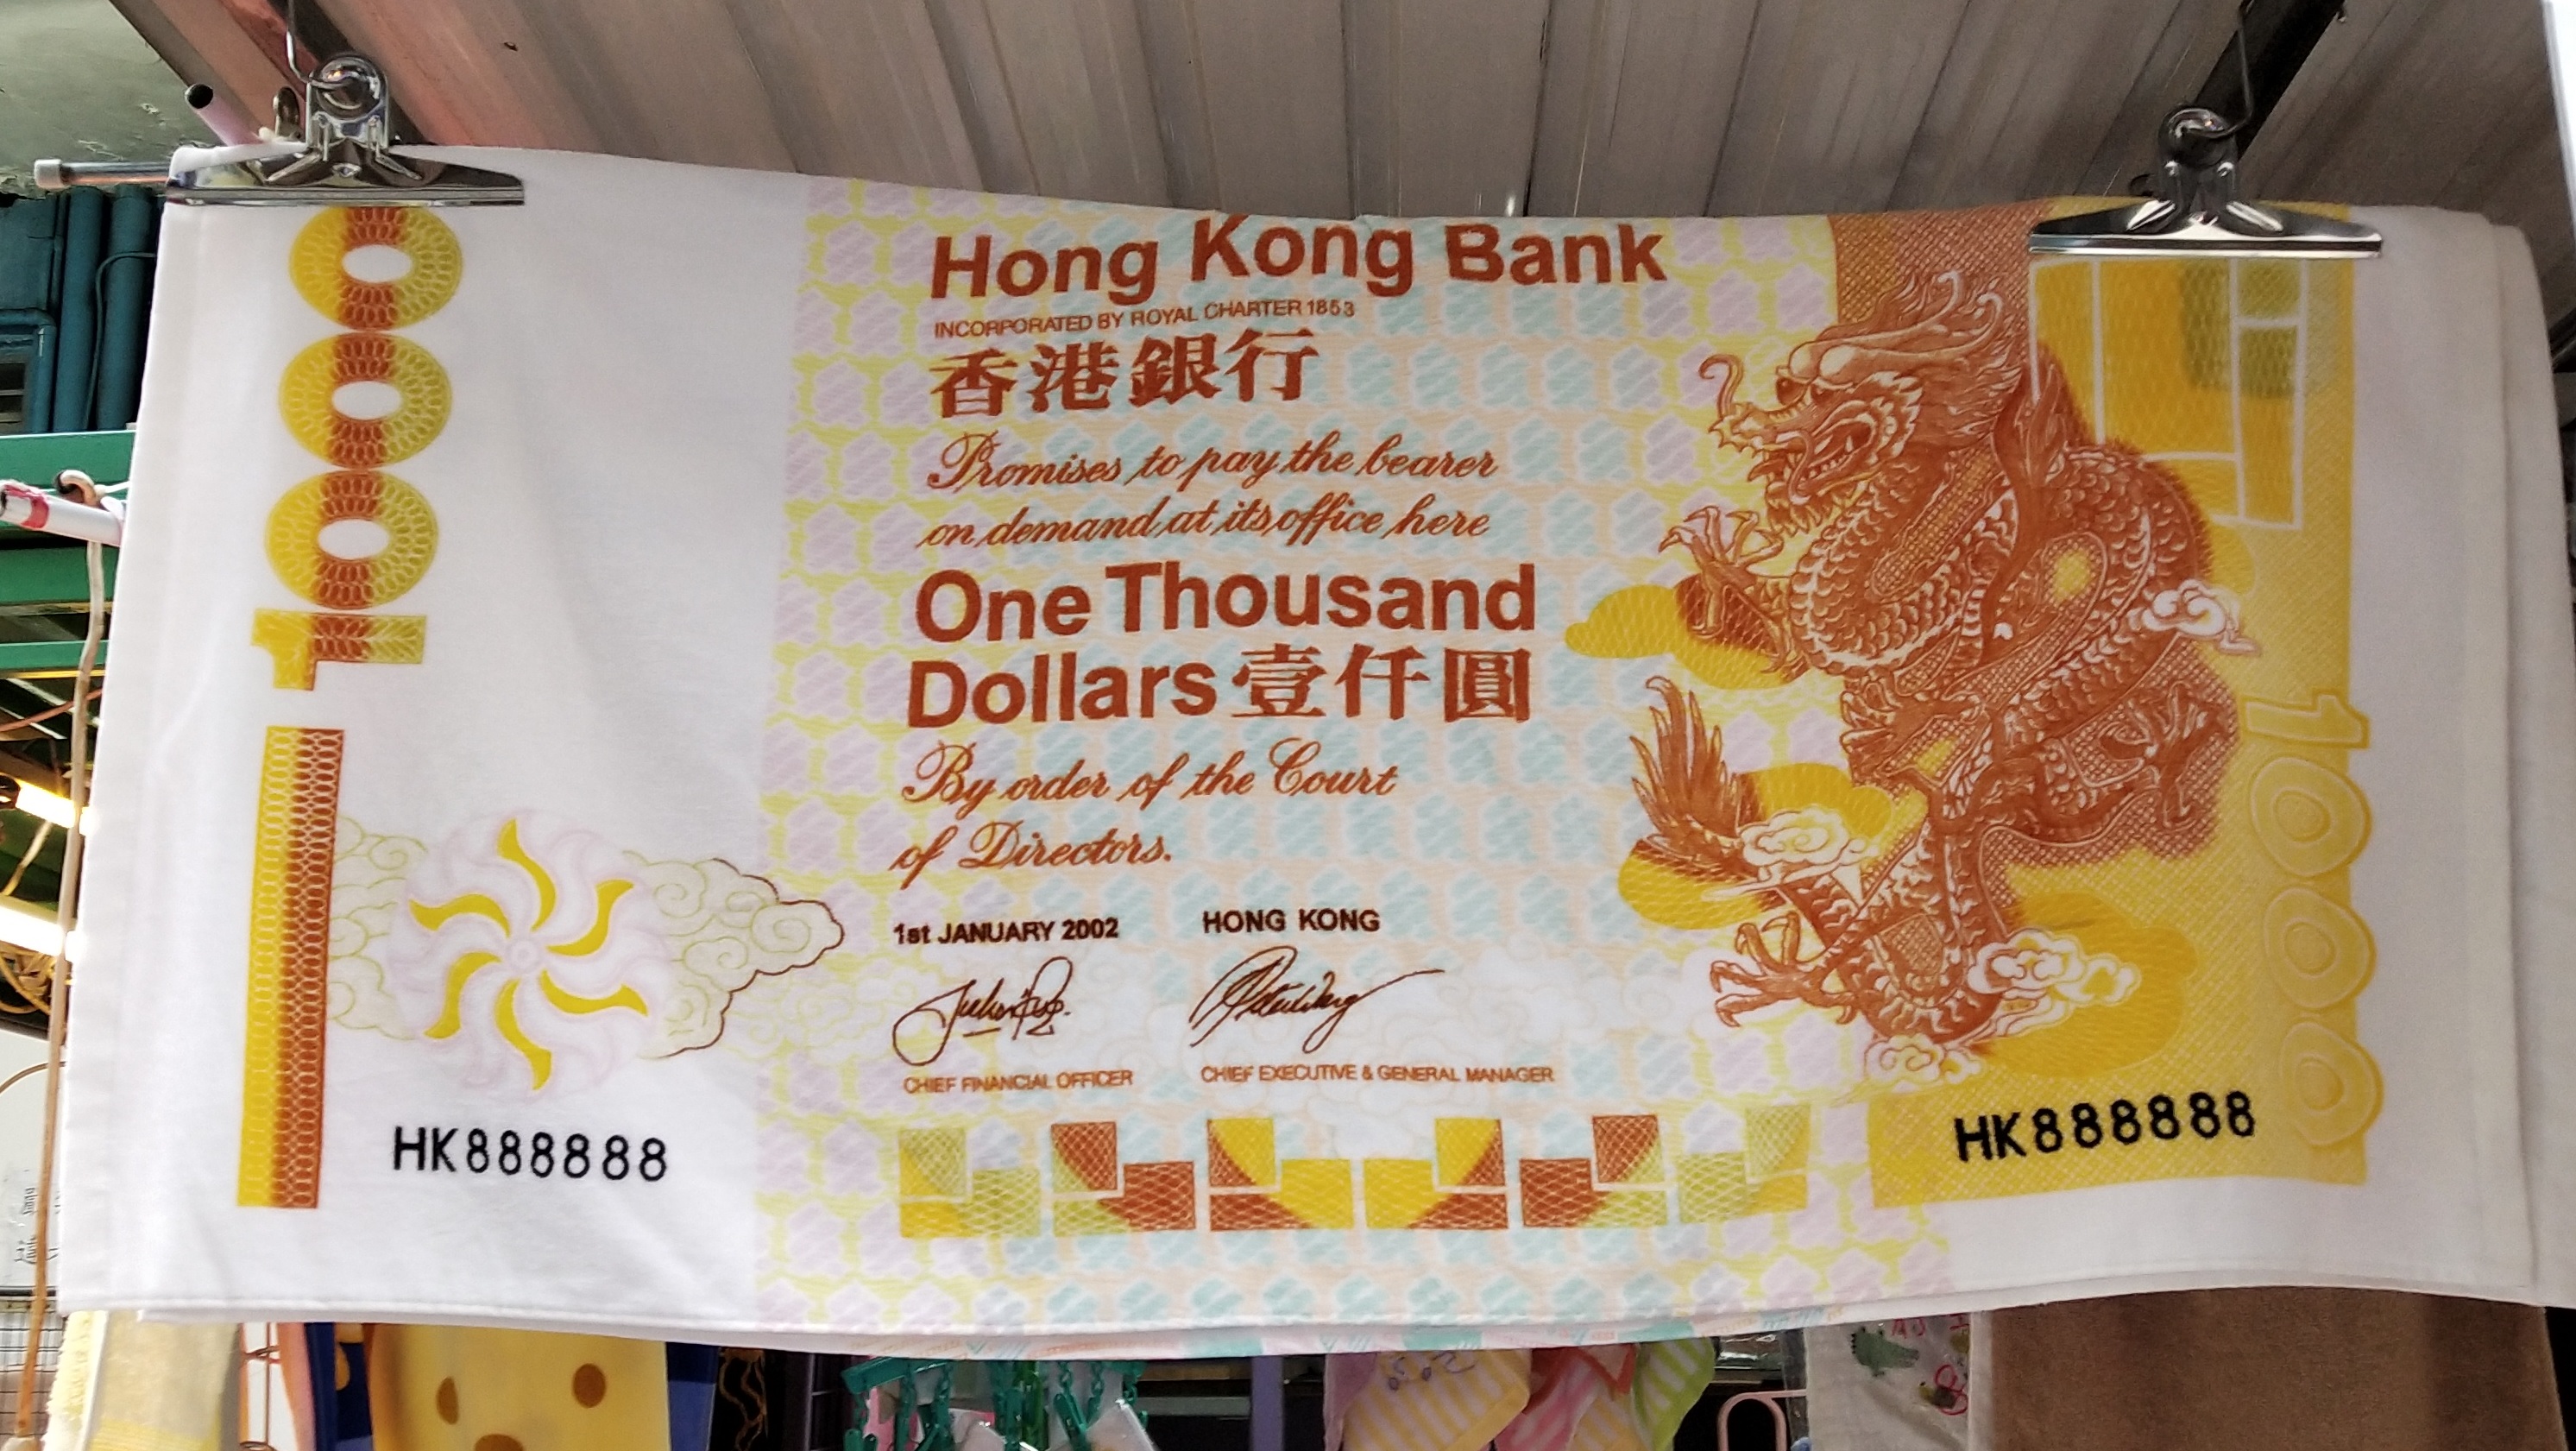 Share Frank's post about the first issuance of 1000 Hong Kong Dollar note